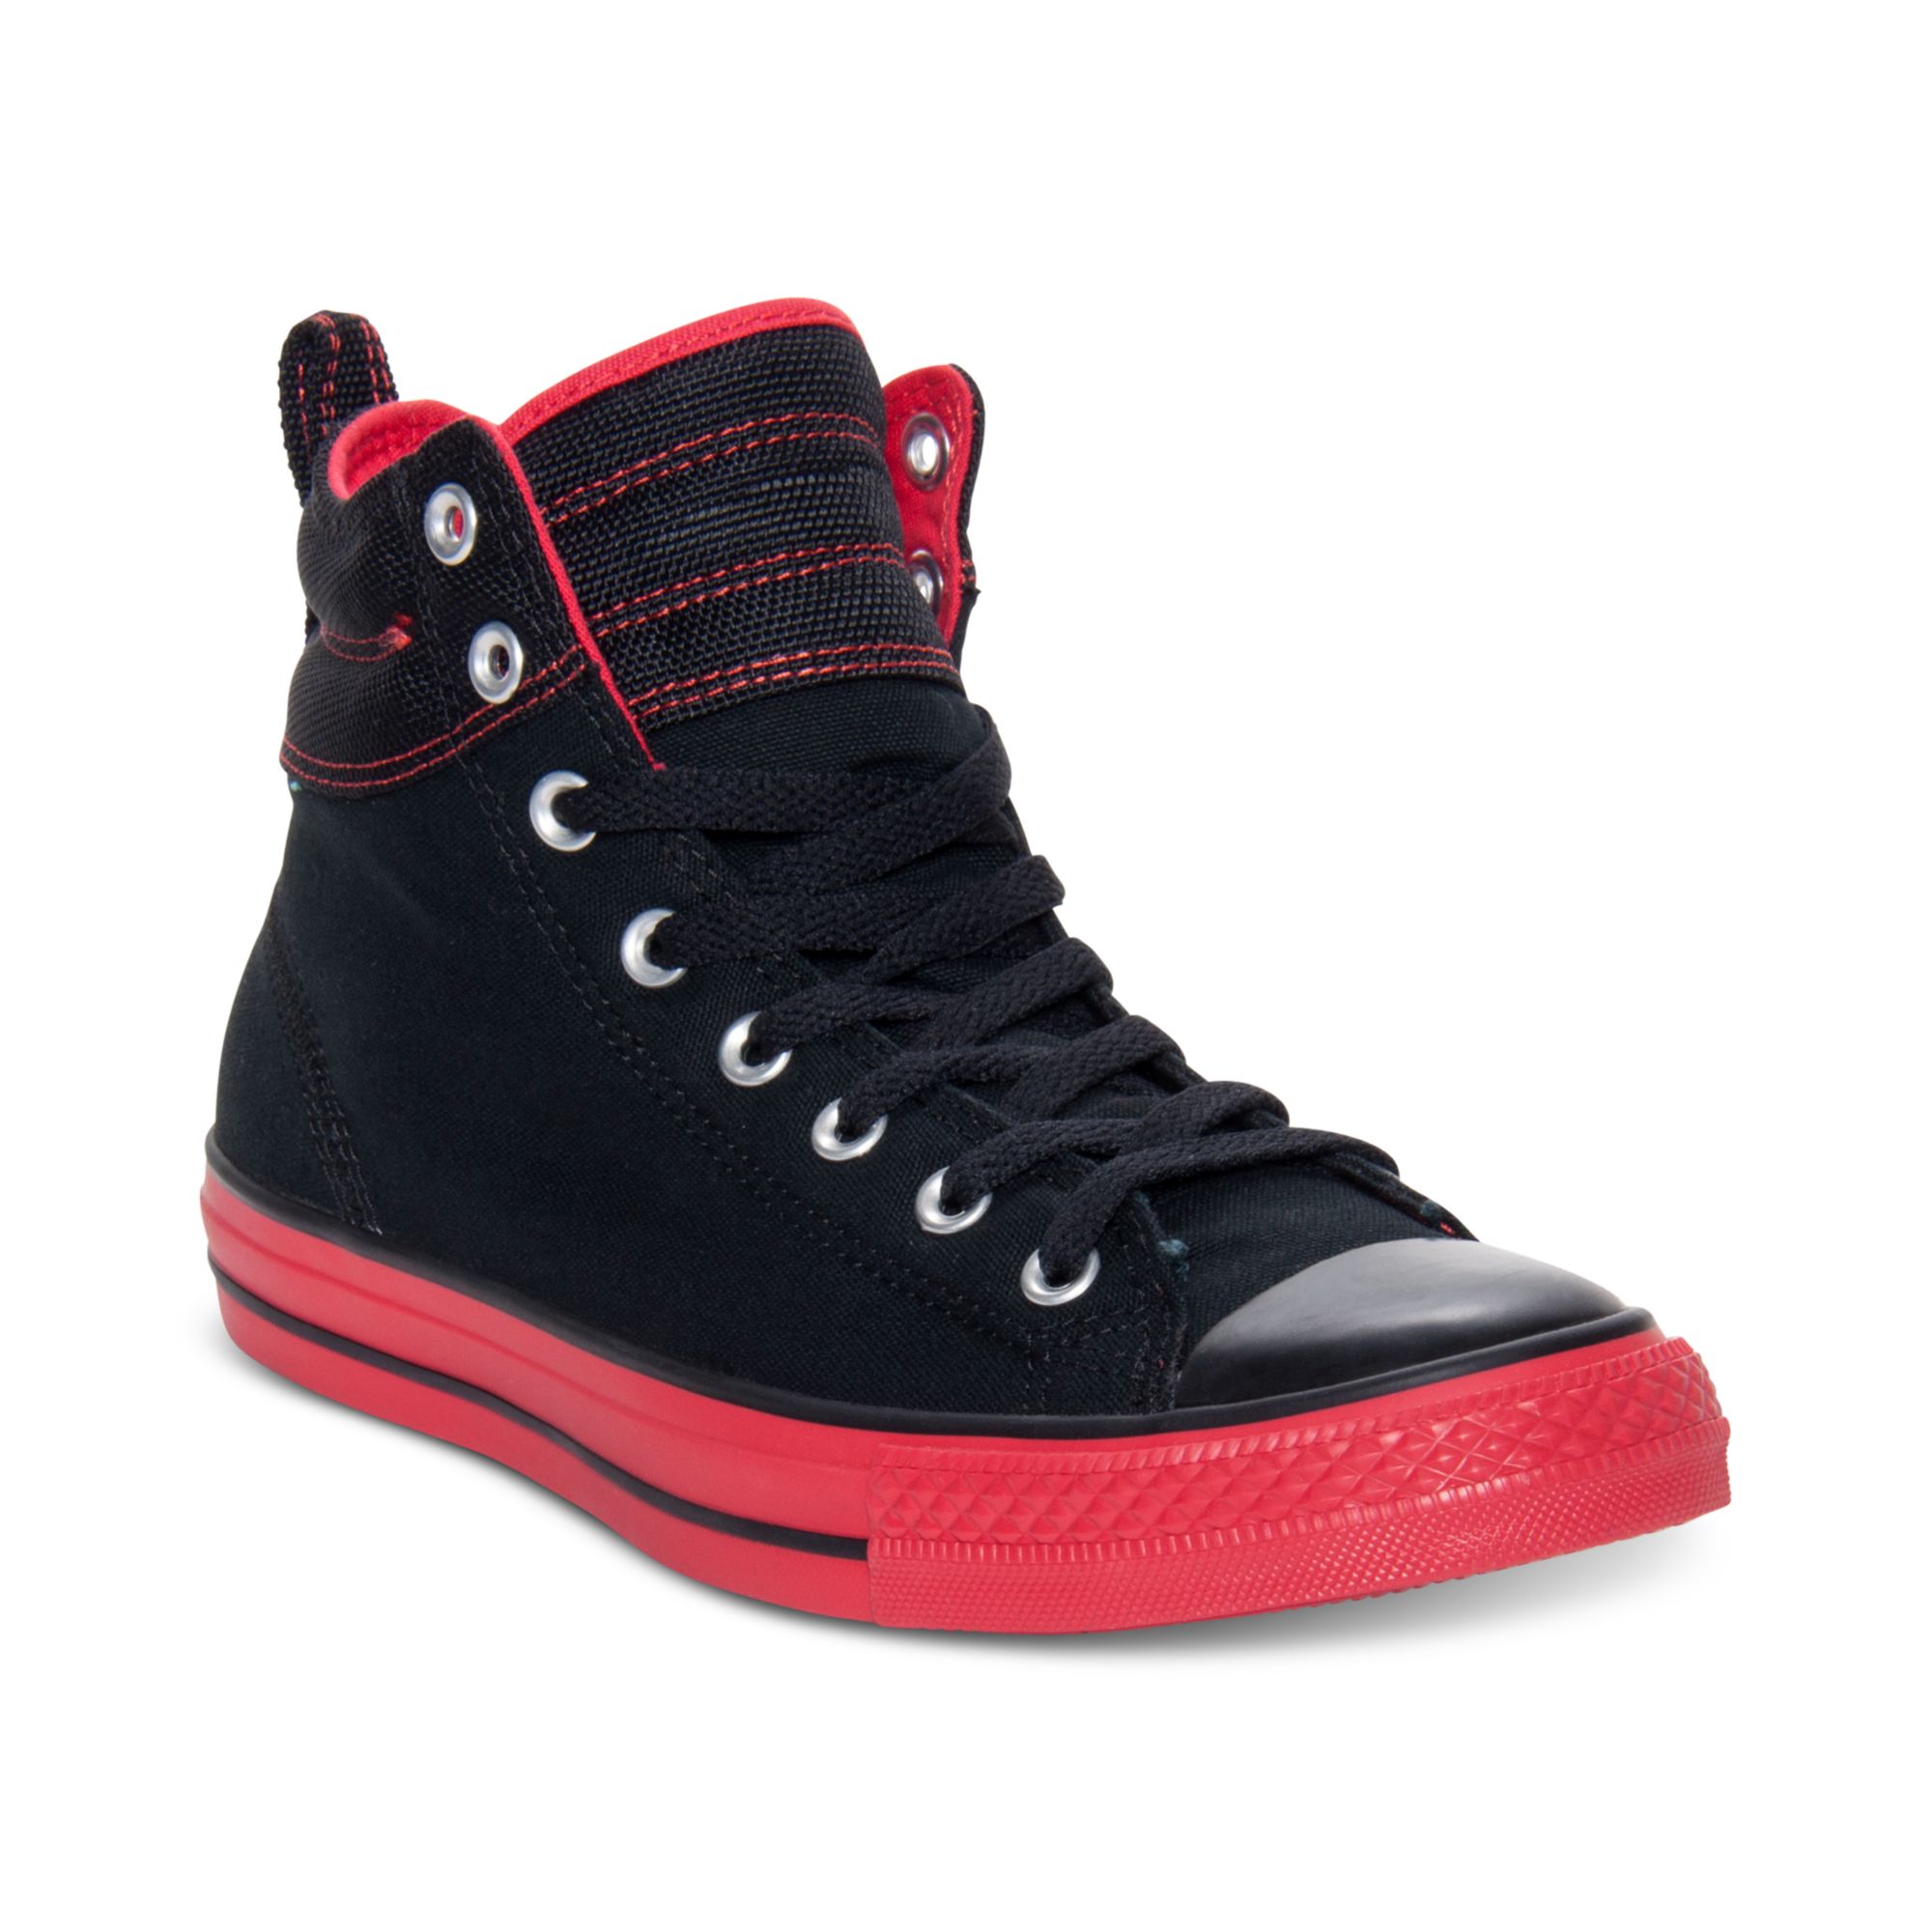 Red Or Black Converse | vlr.eng.br